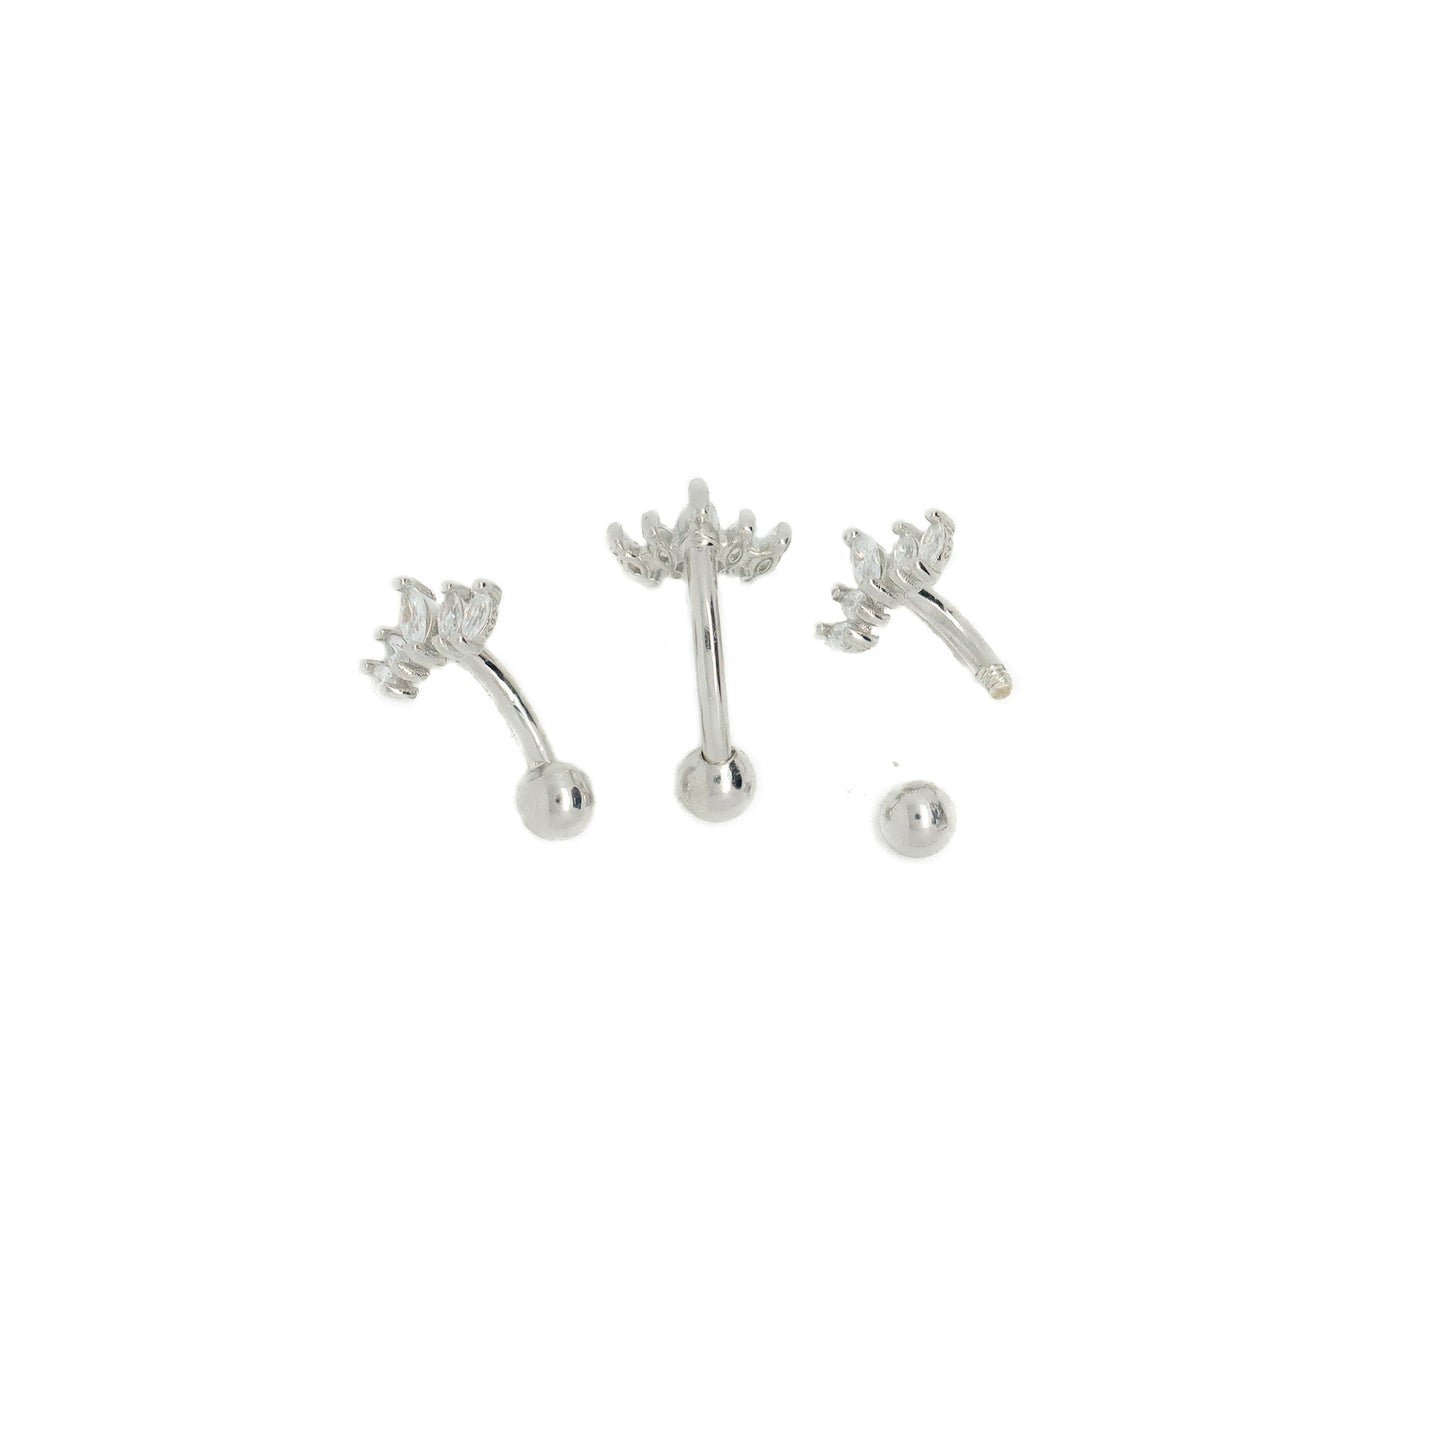 Solid 925 Silver | 16G 14G Petite Tiara Reverse Belly Ring | 6mm 1/4" 8mm 5/16" 10mm 3/8" - Sturdy South